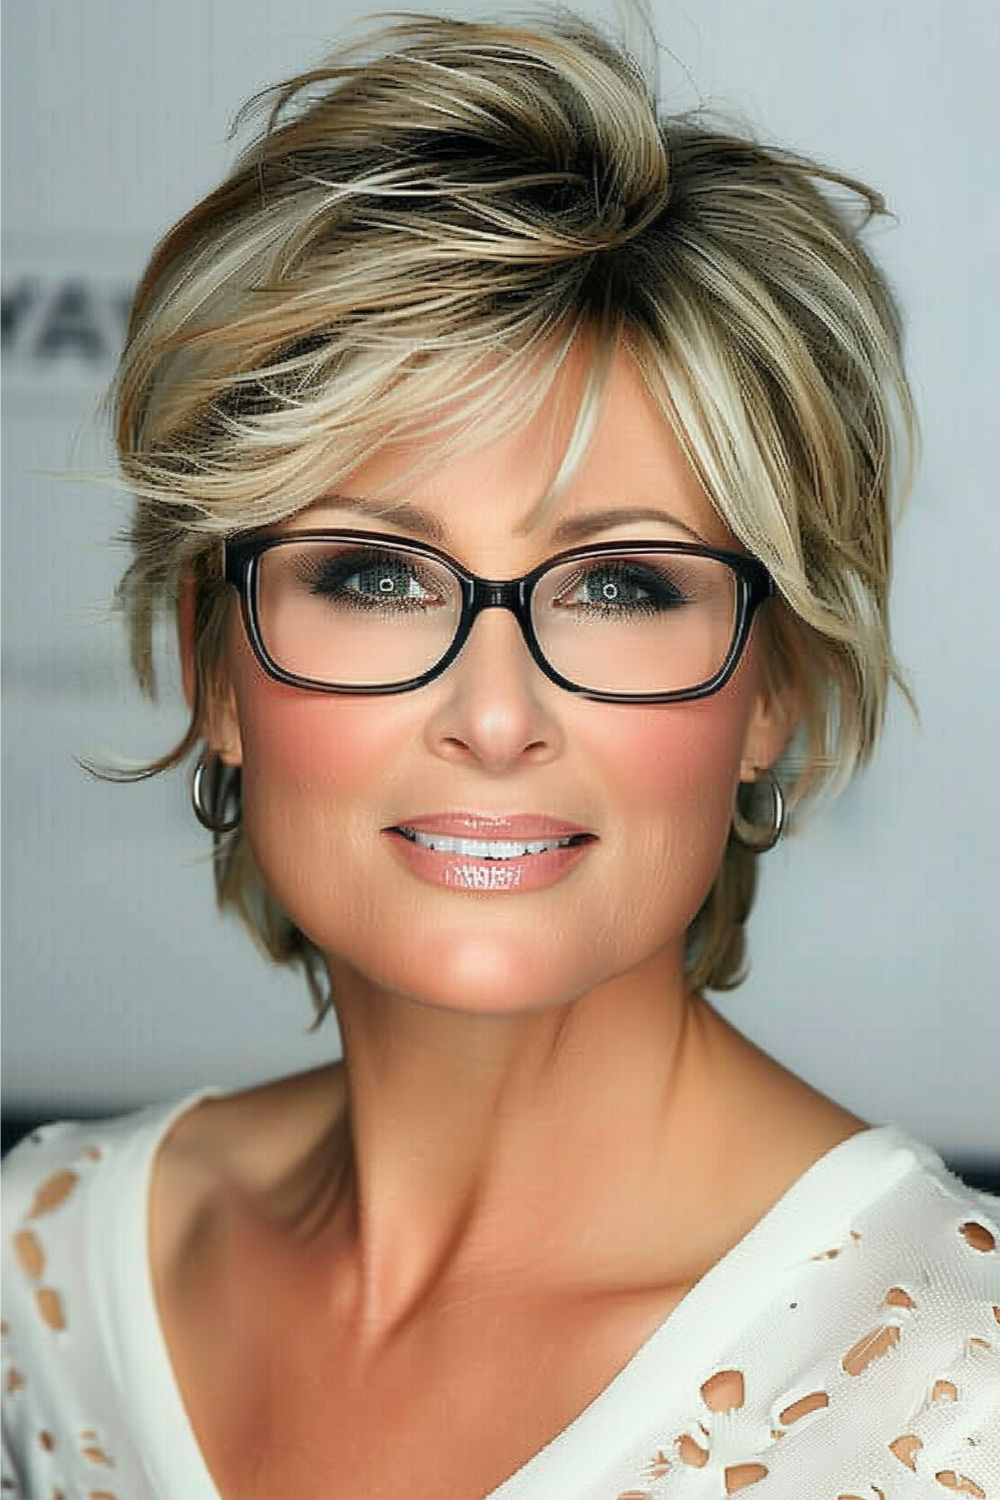 Stylish and Chic Hairstyles for Short Hair